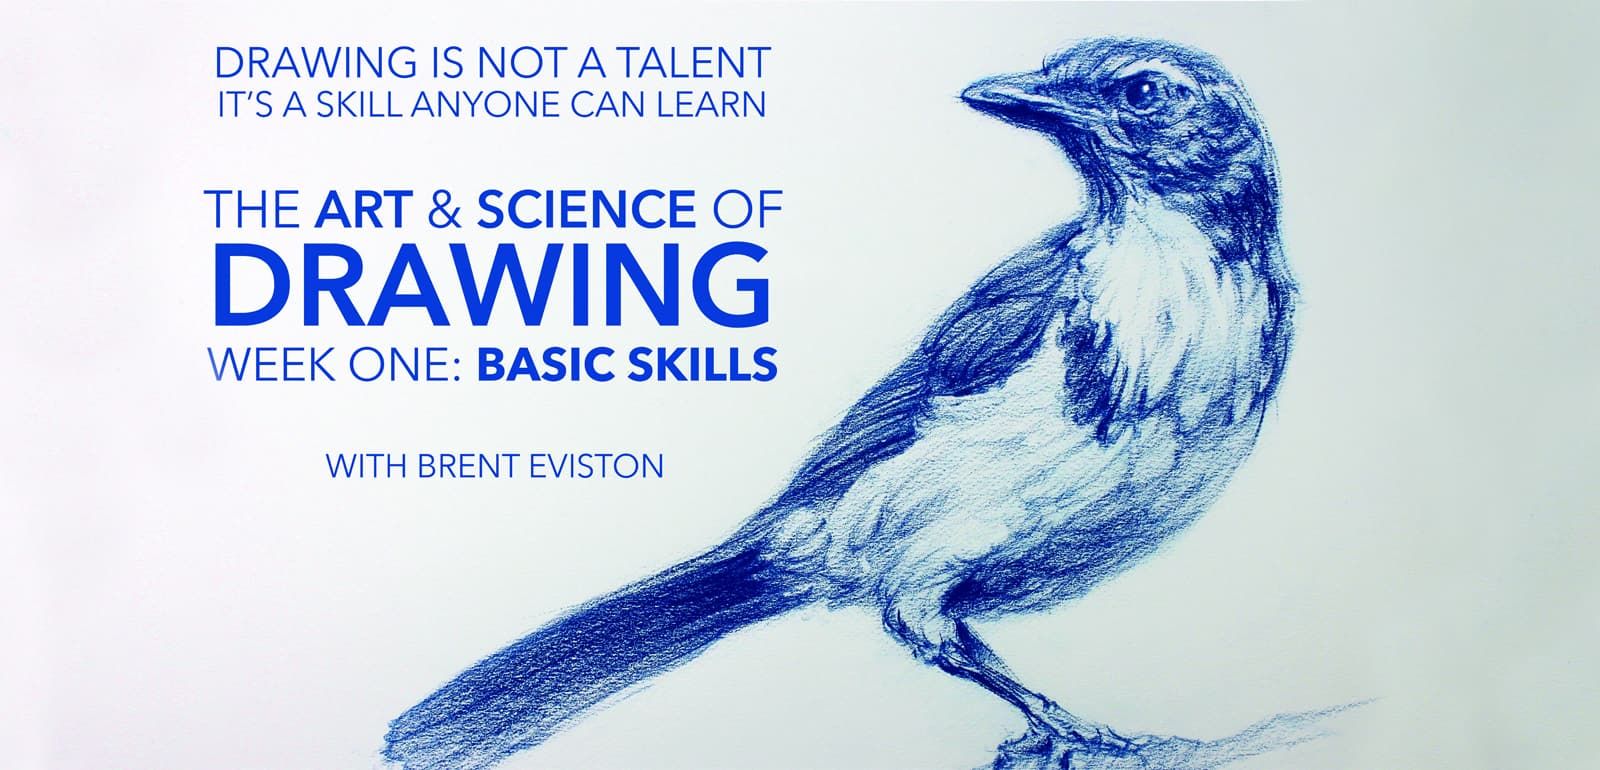 The Art & Science of Drawing Week 1, Basic Skills Course Artists Network